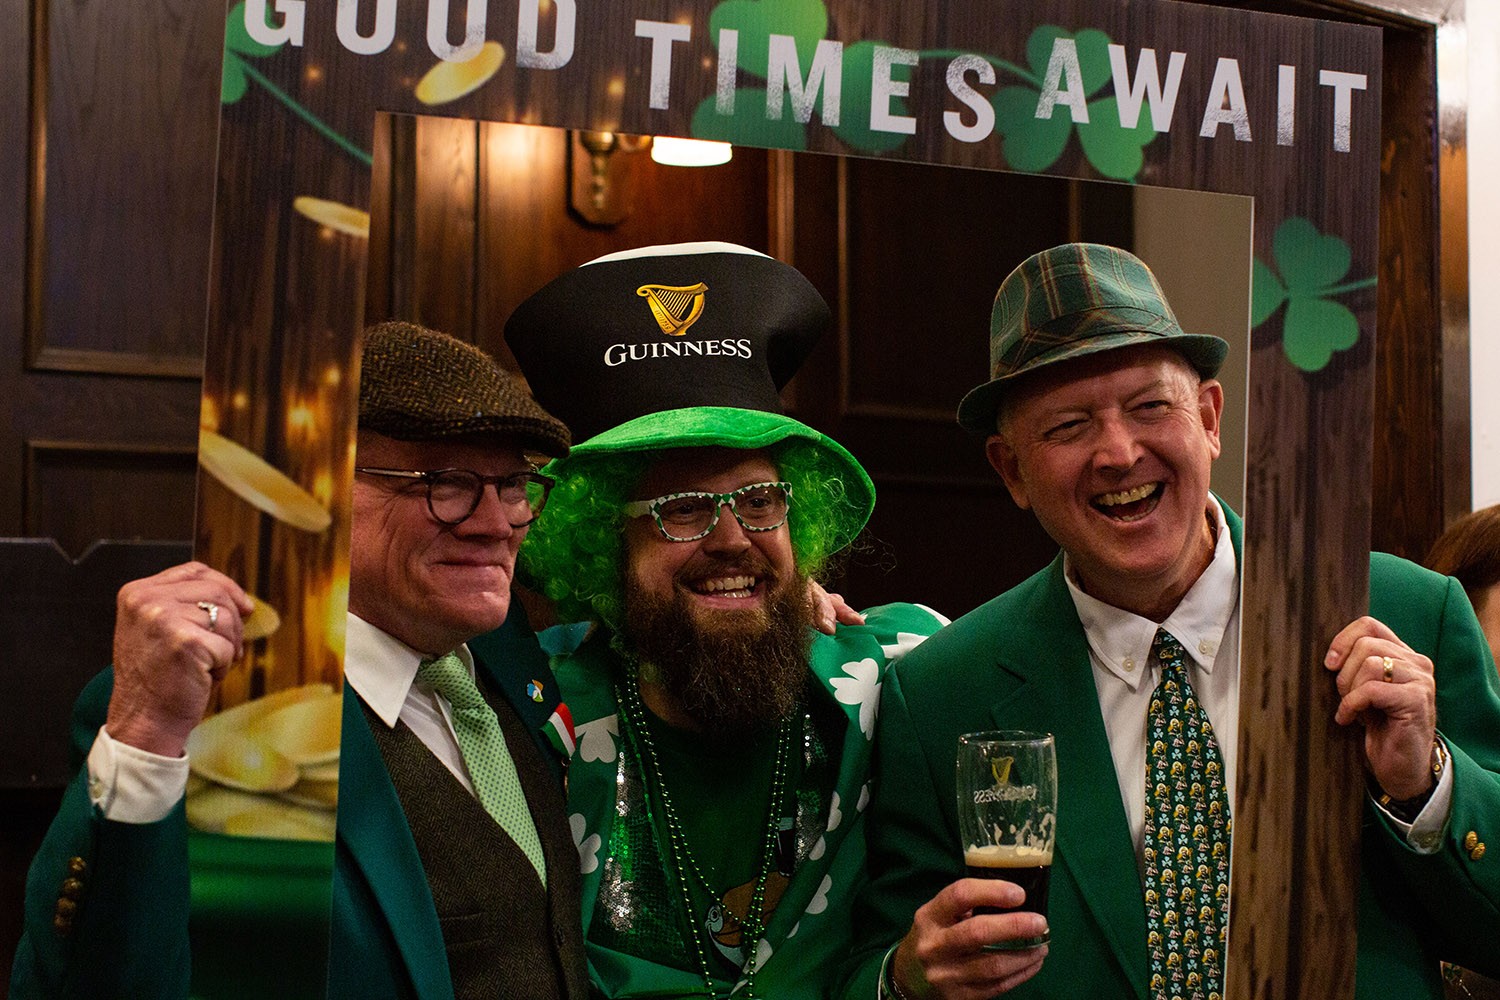 A group celebrating St. Patrick’s Day poses for a photograph at Waxy O’Connor’s Irish Pub in downtown San Antonio, Texas, on Thursday, March 17, 2022. Photo by Kaylee Greenlee Beal | @kgreenleephoto | Heron contributor